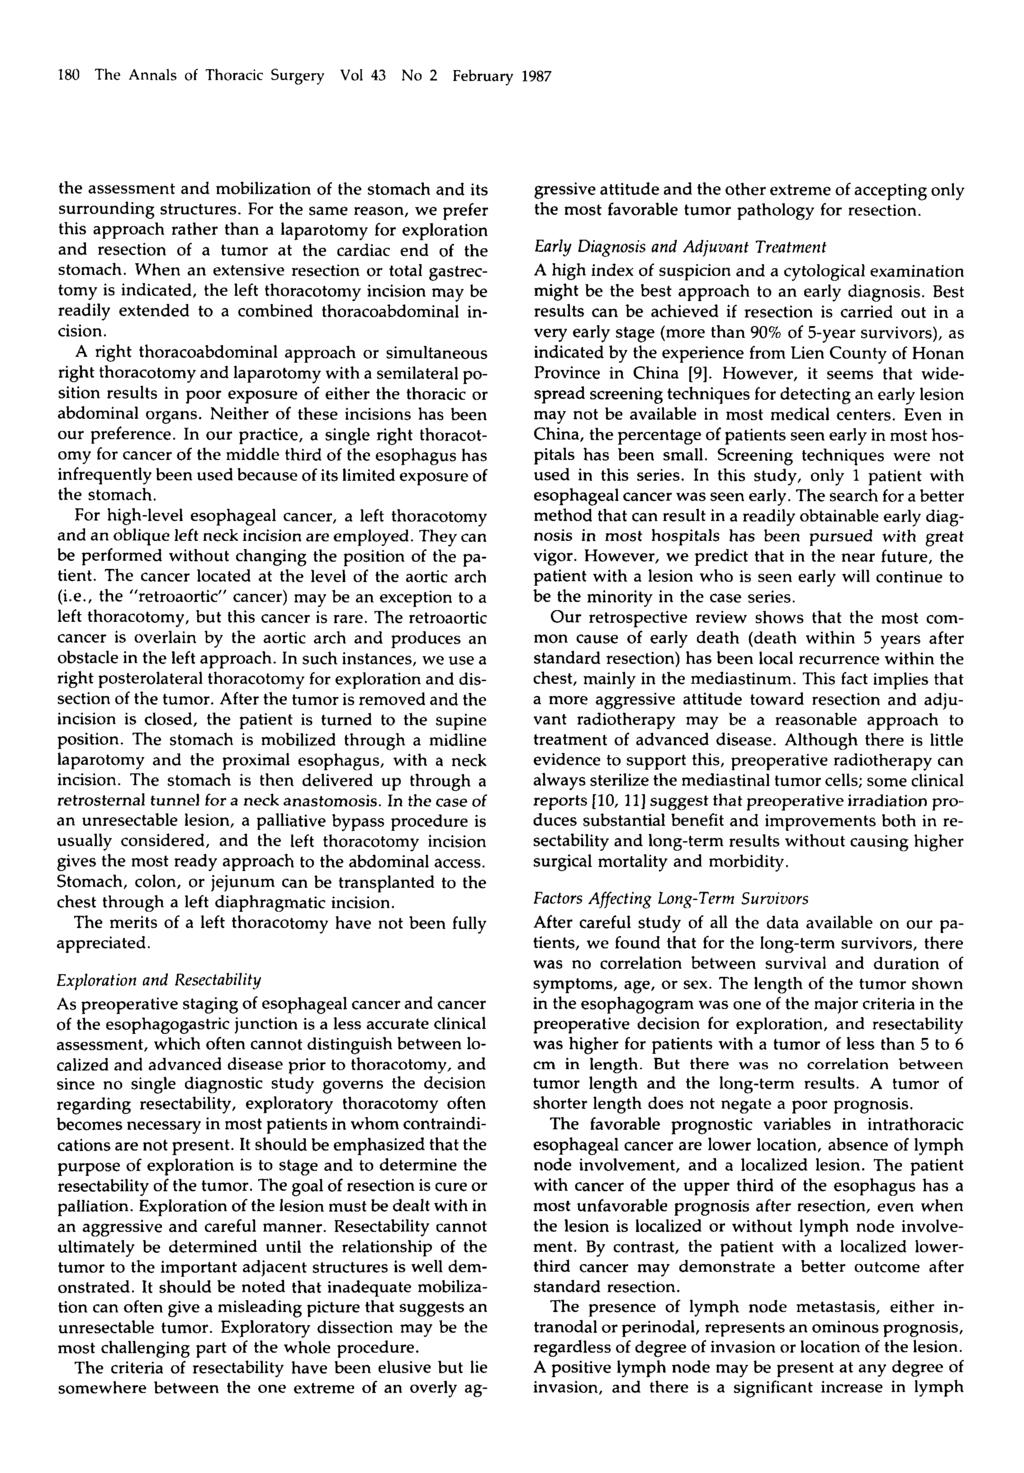 180 The Annals of Thoracic Surgery Vol 43 No 2 February 1987 the assessment and mobilization of the stomach and its surrounding structures.